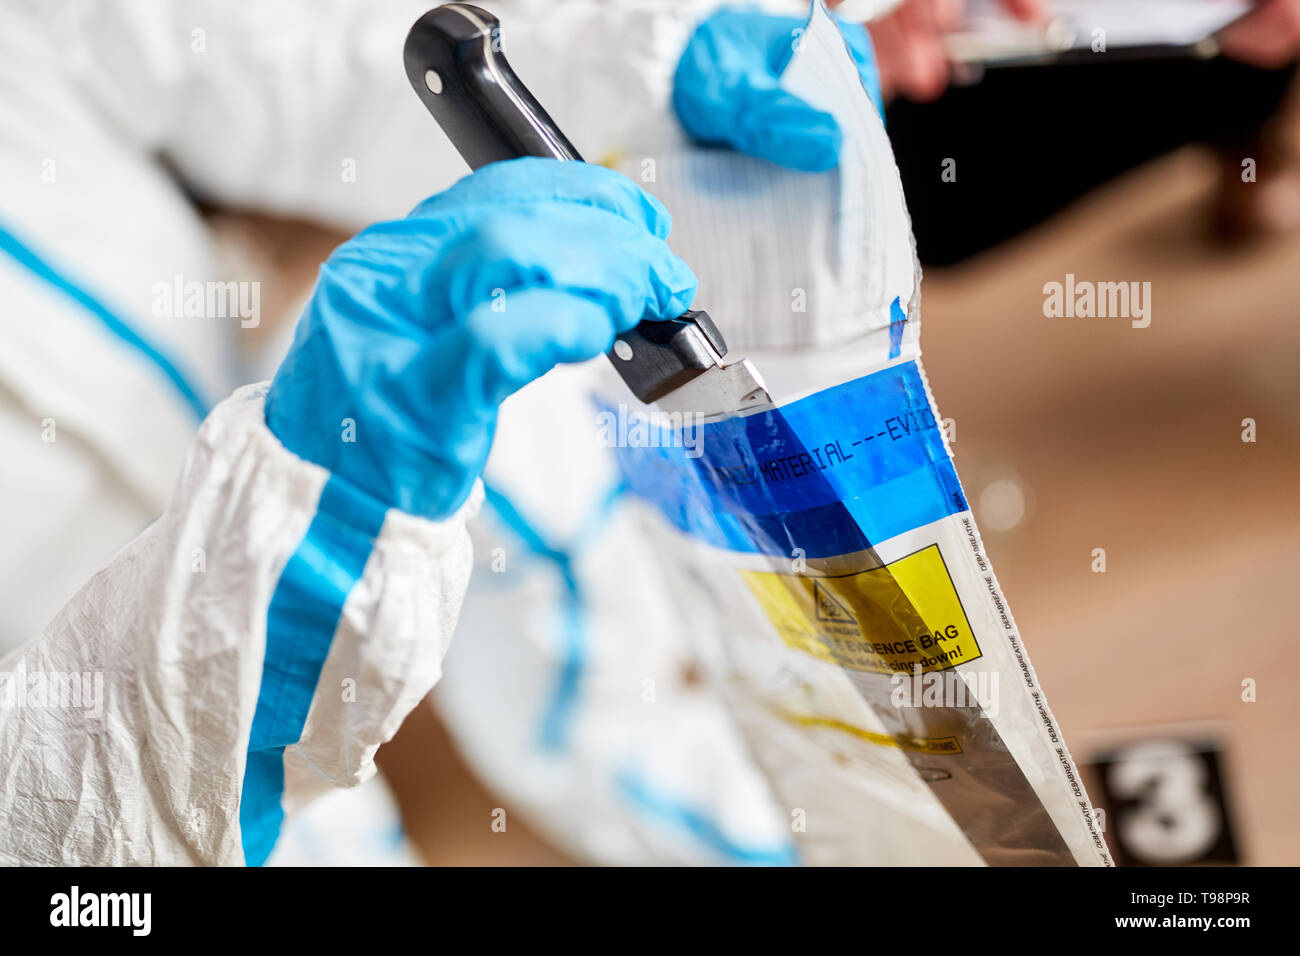 Messer as proof of forensics at the scene is packed by the forensic science Stock Photo